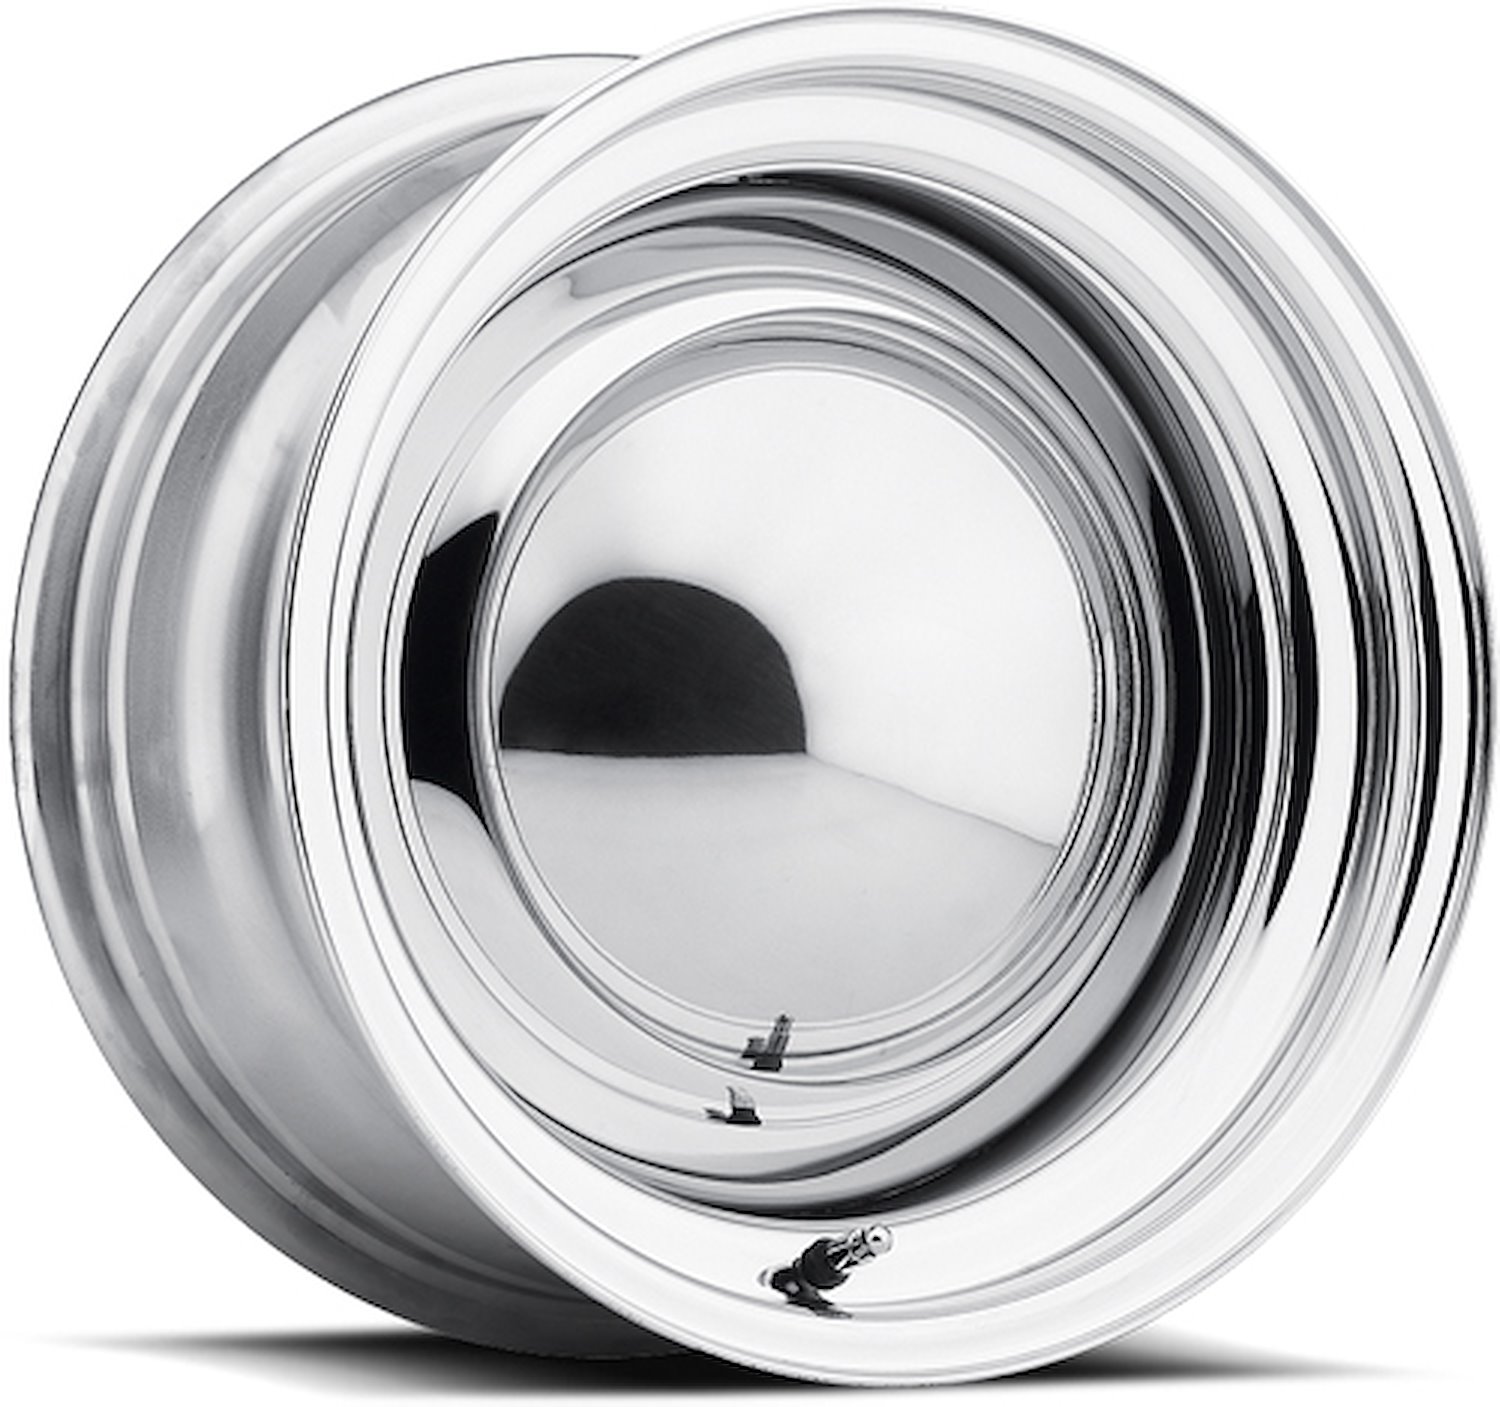 Solid Wheel Chrome 15X7 5X45 5X475 Bolt Circle 425 Back Spacing +6 offset 319 Center Bore 1500 lbs Load Rating